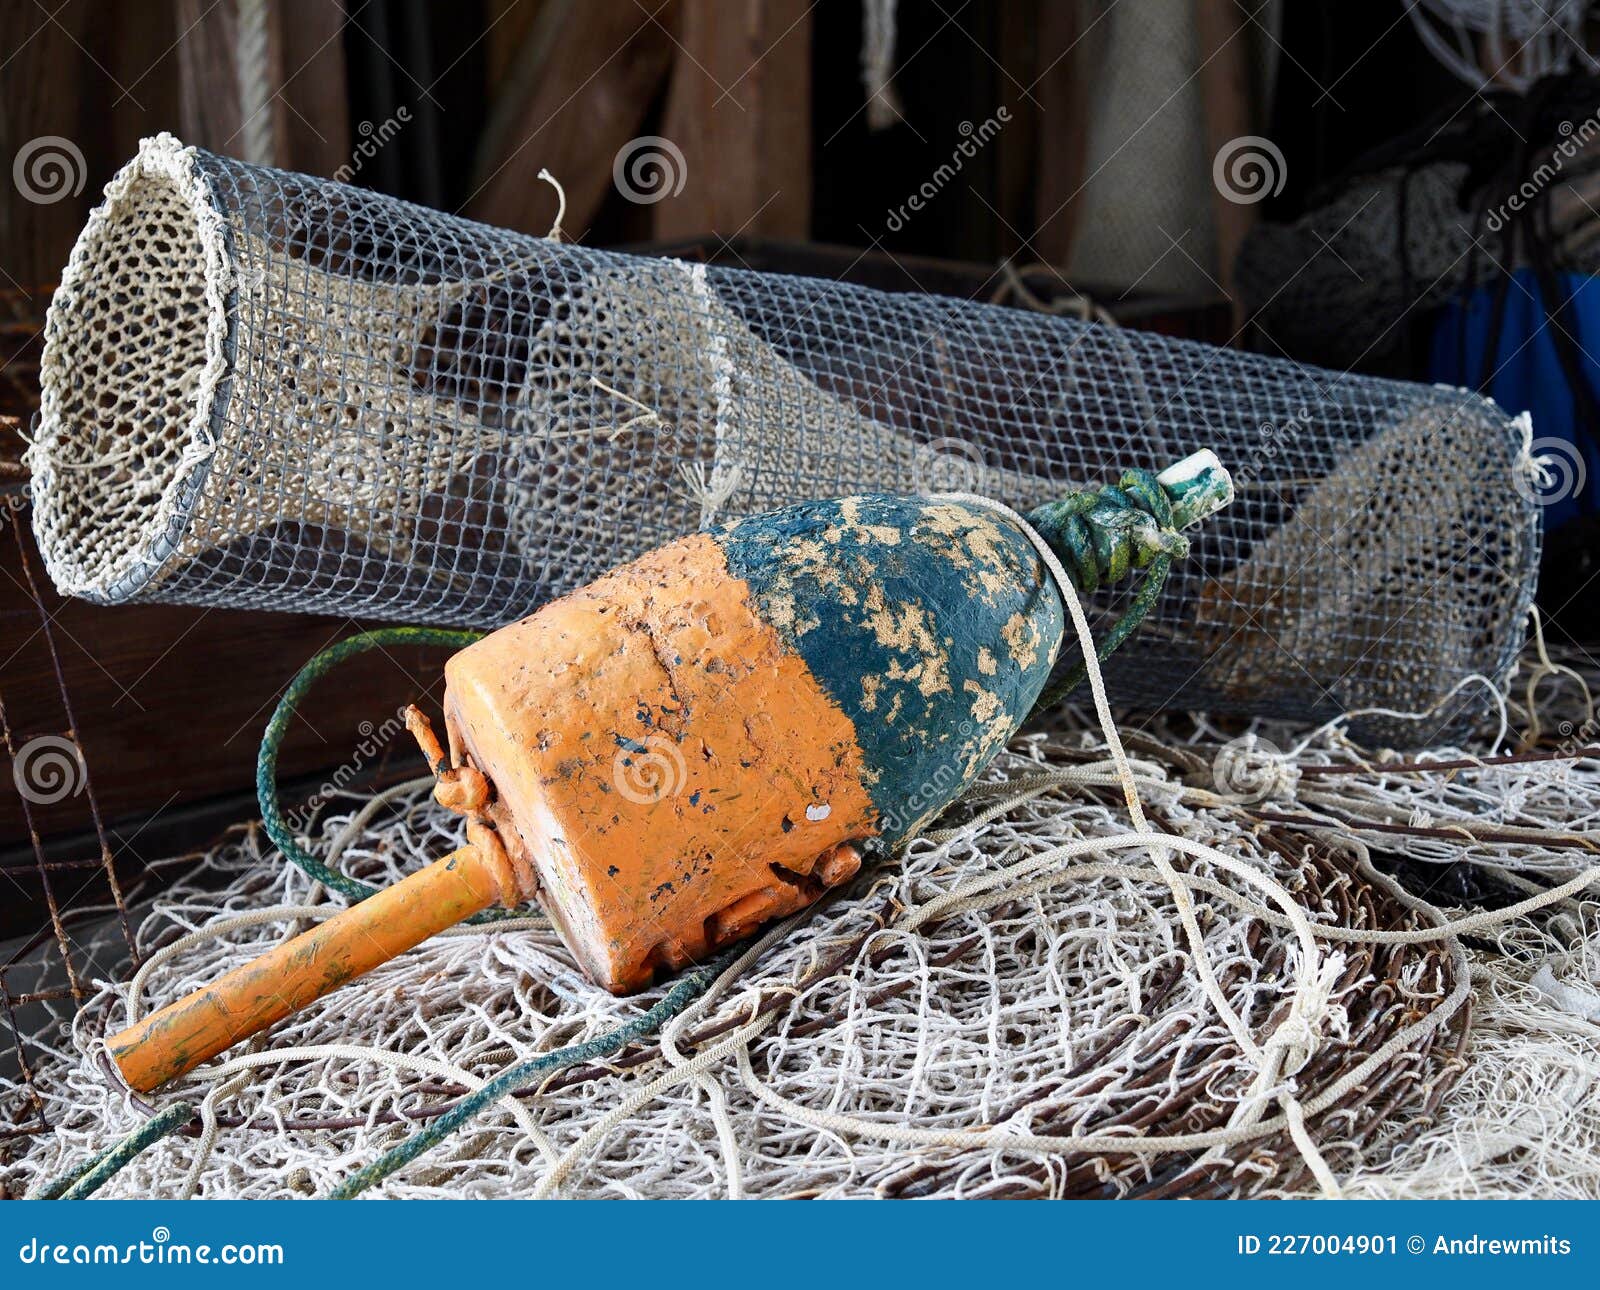 Crab Trap and Fishing Float Resting on Nets Stock Image - Image of